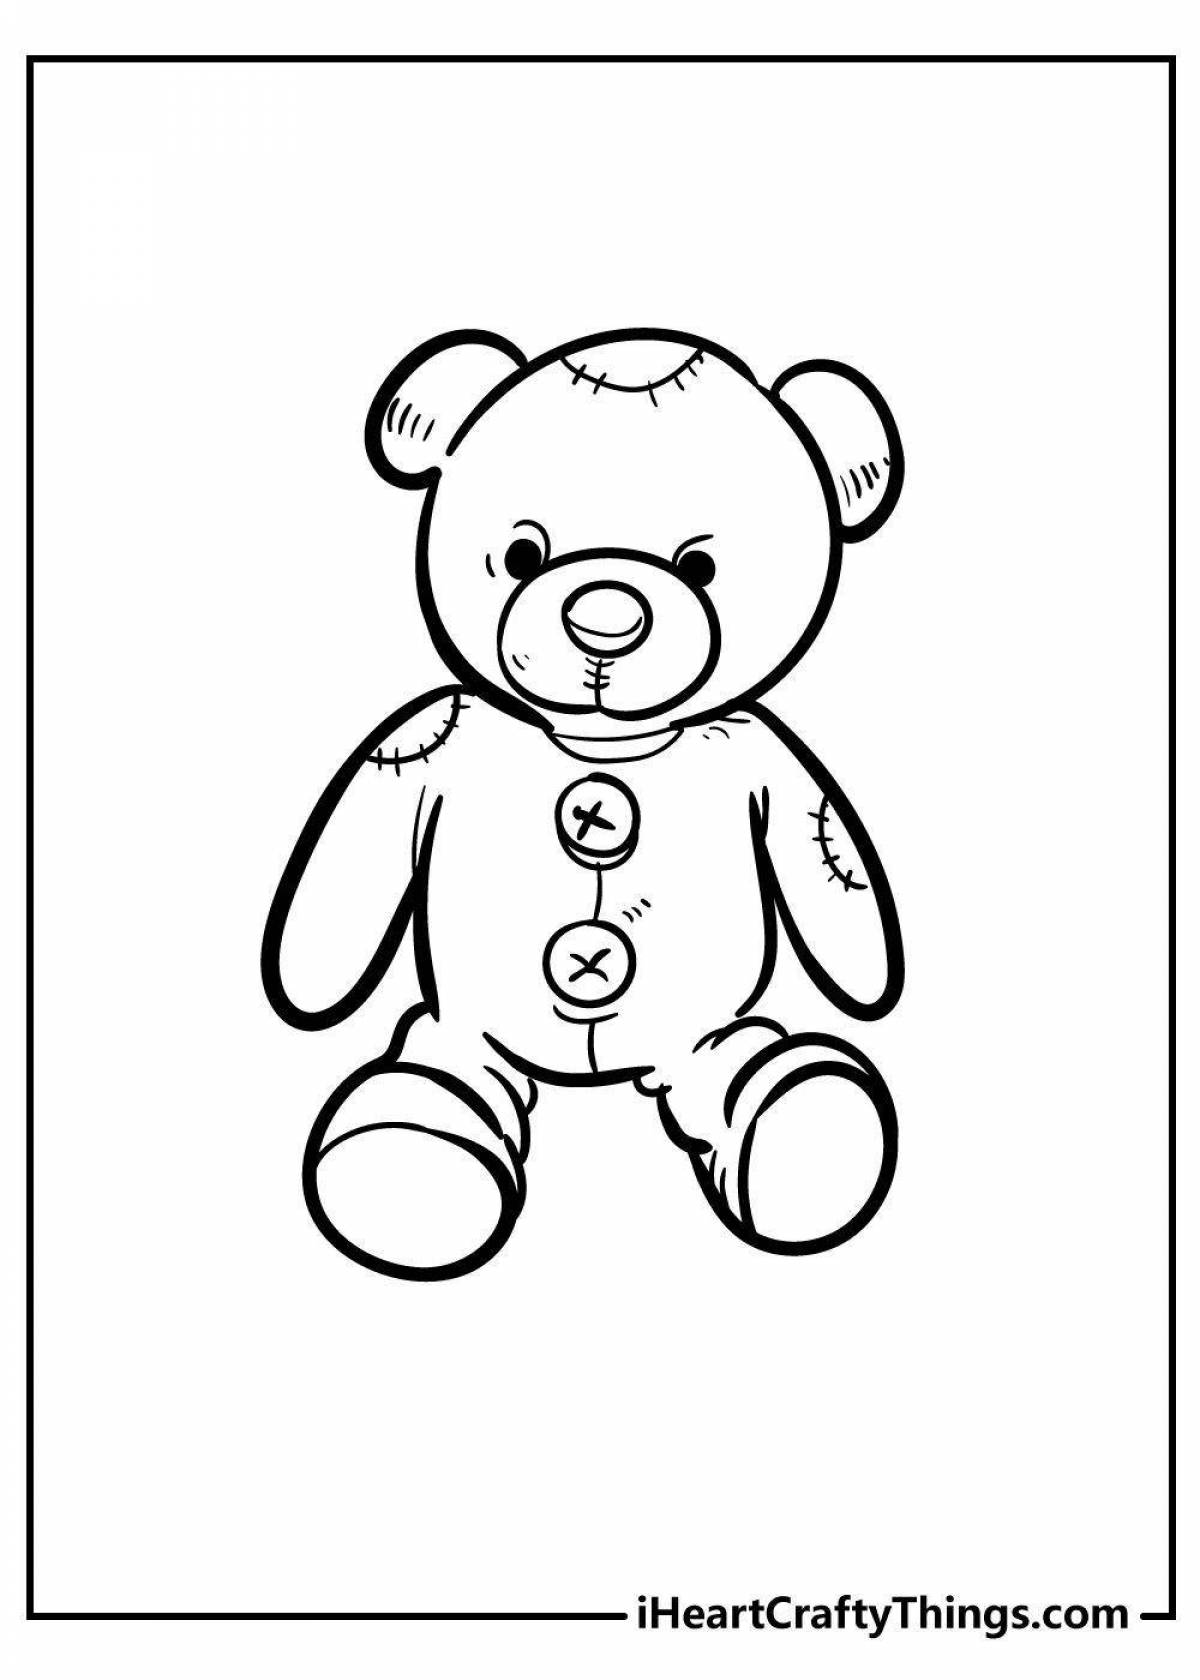 Snuggly-wuggly teddy bear in baby pants coloring page